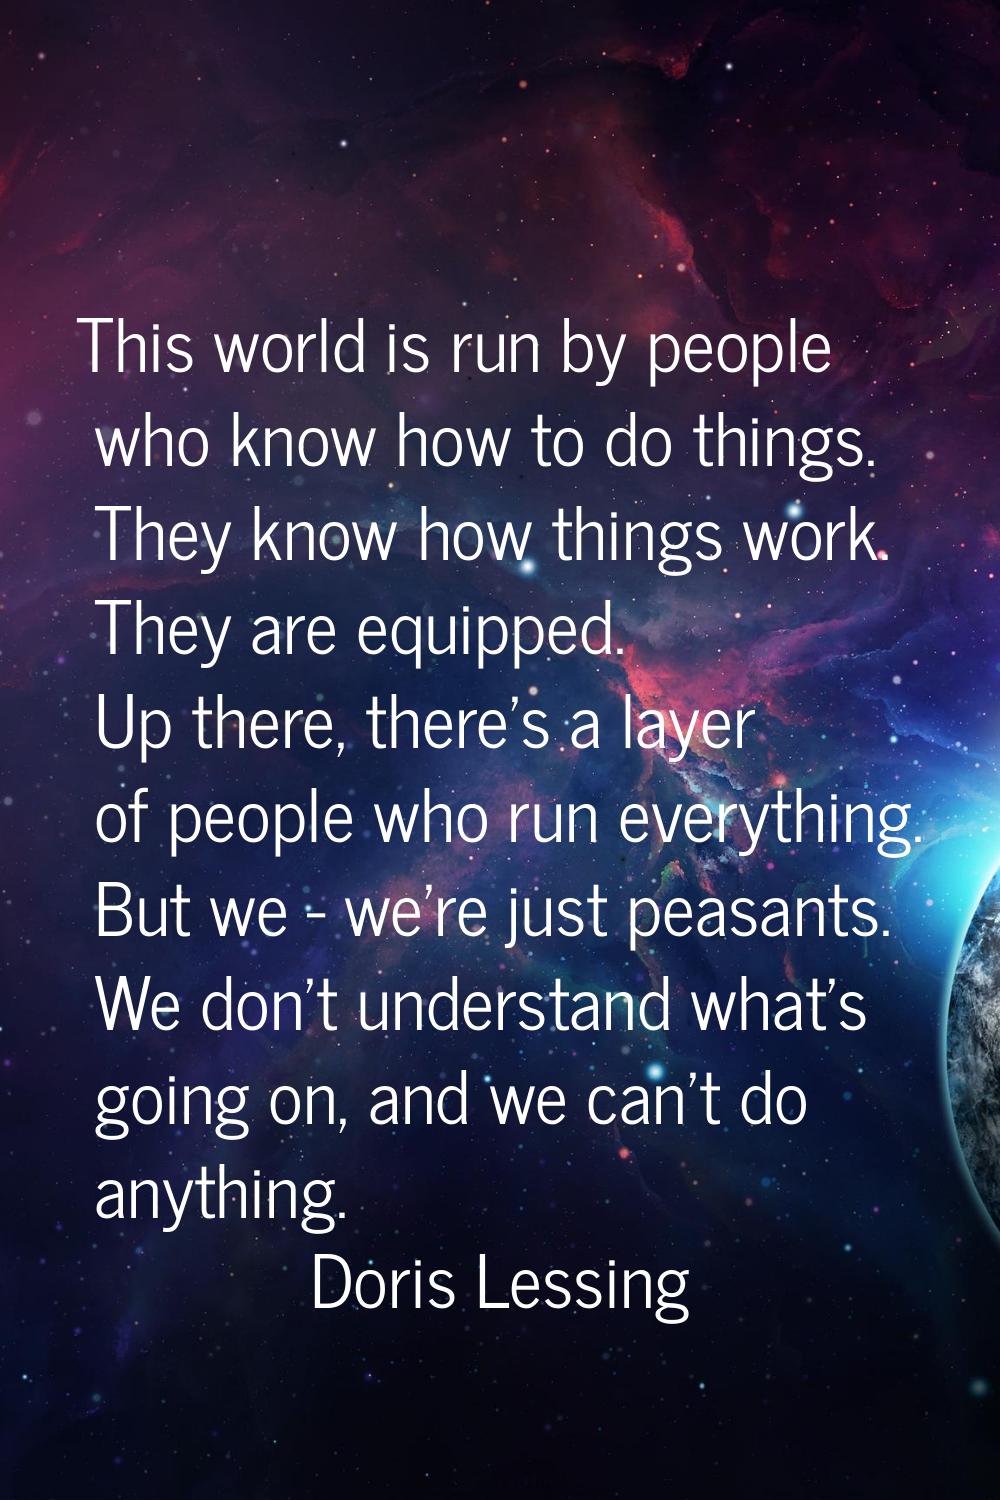 This world is run by people who know how to do things. They know how things work. They are equipped